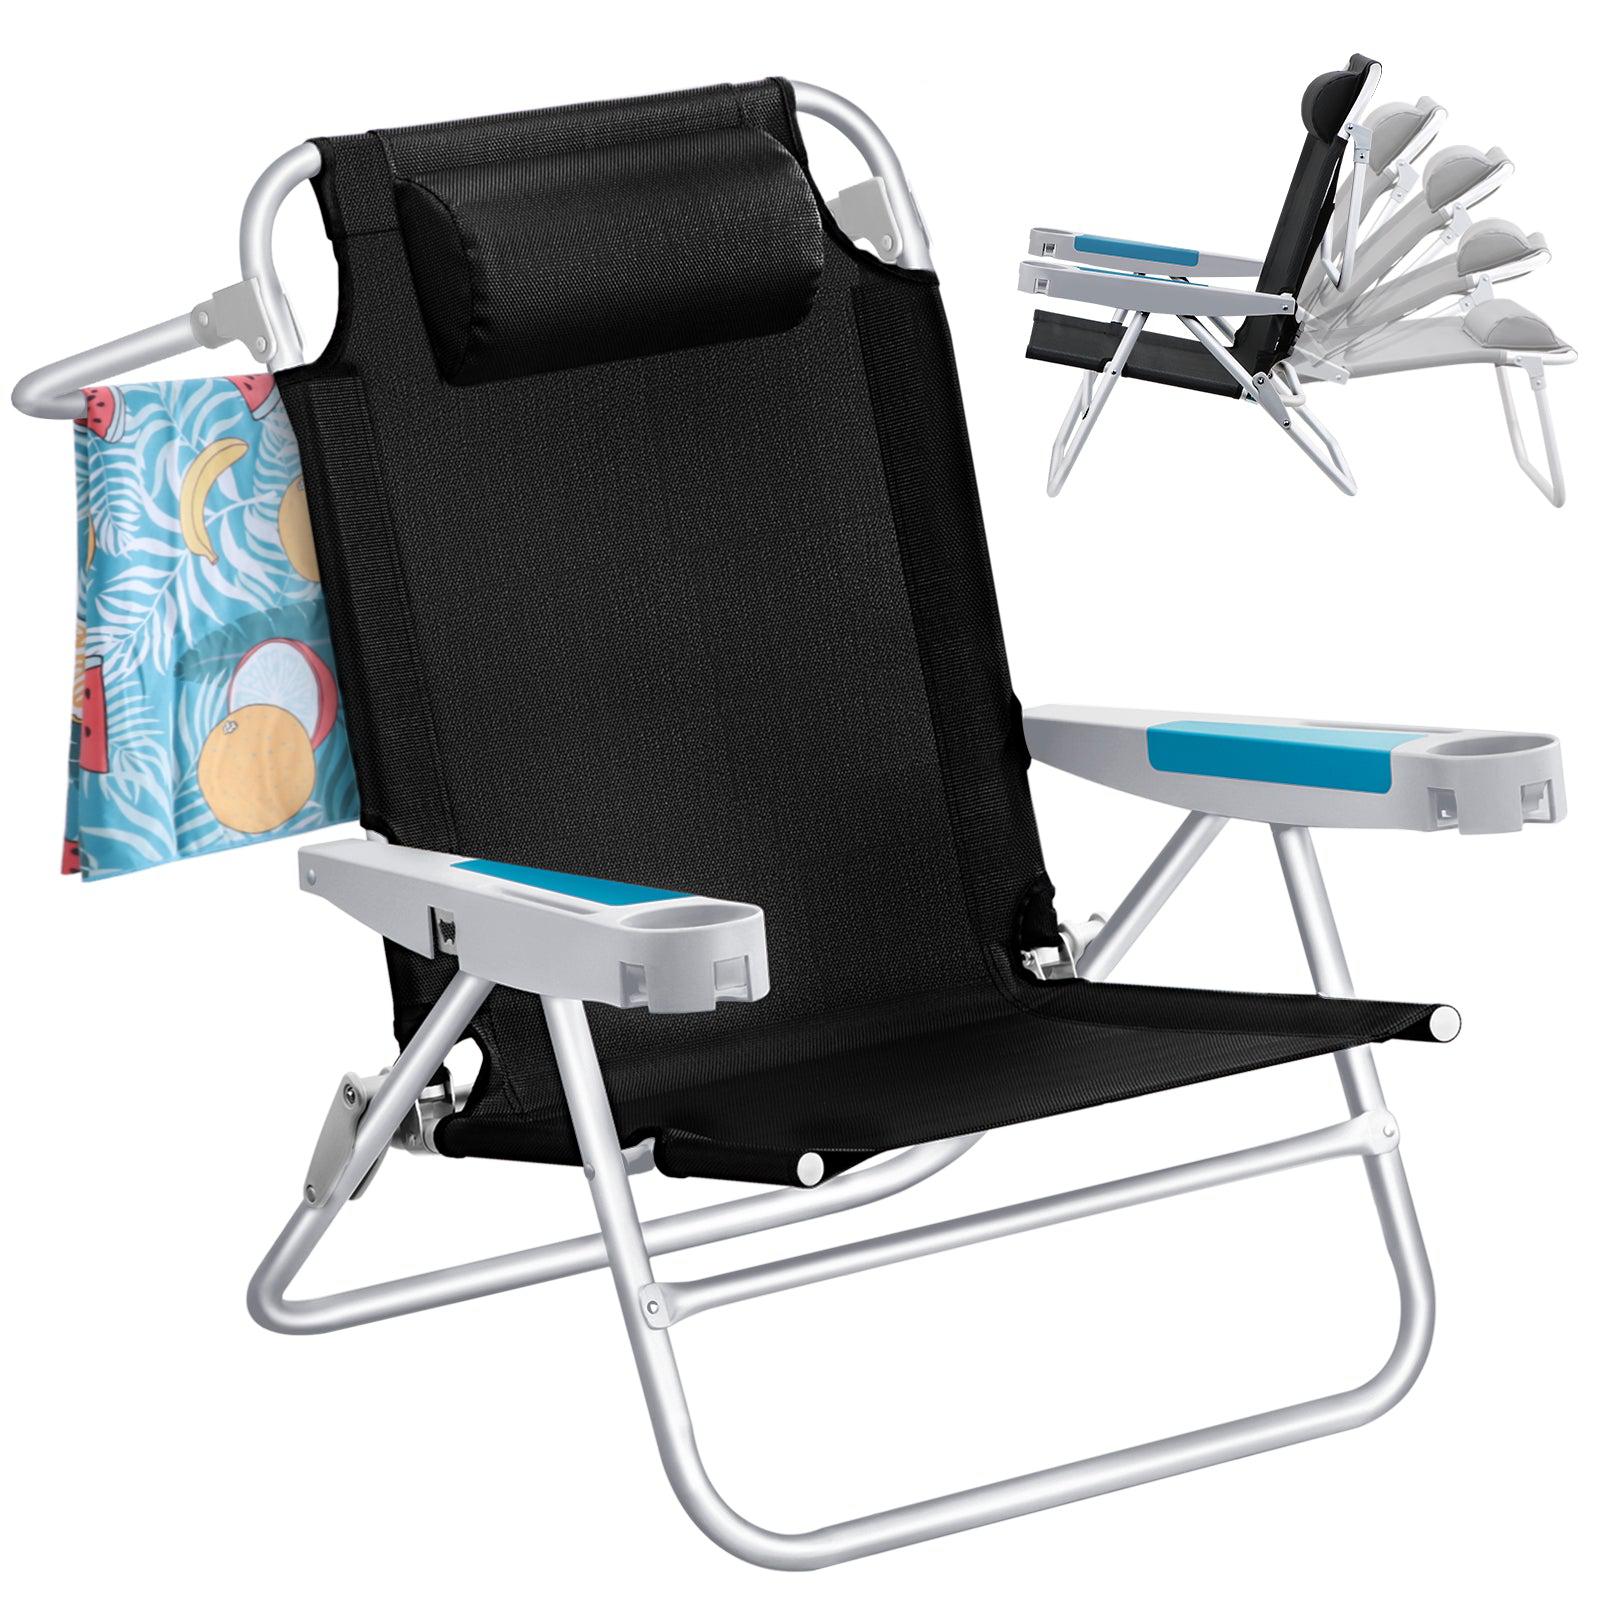 Extra-Wide Backpack Chair | ICECO-www.icecofreezer.com